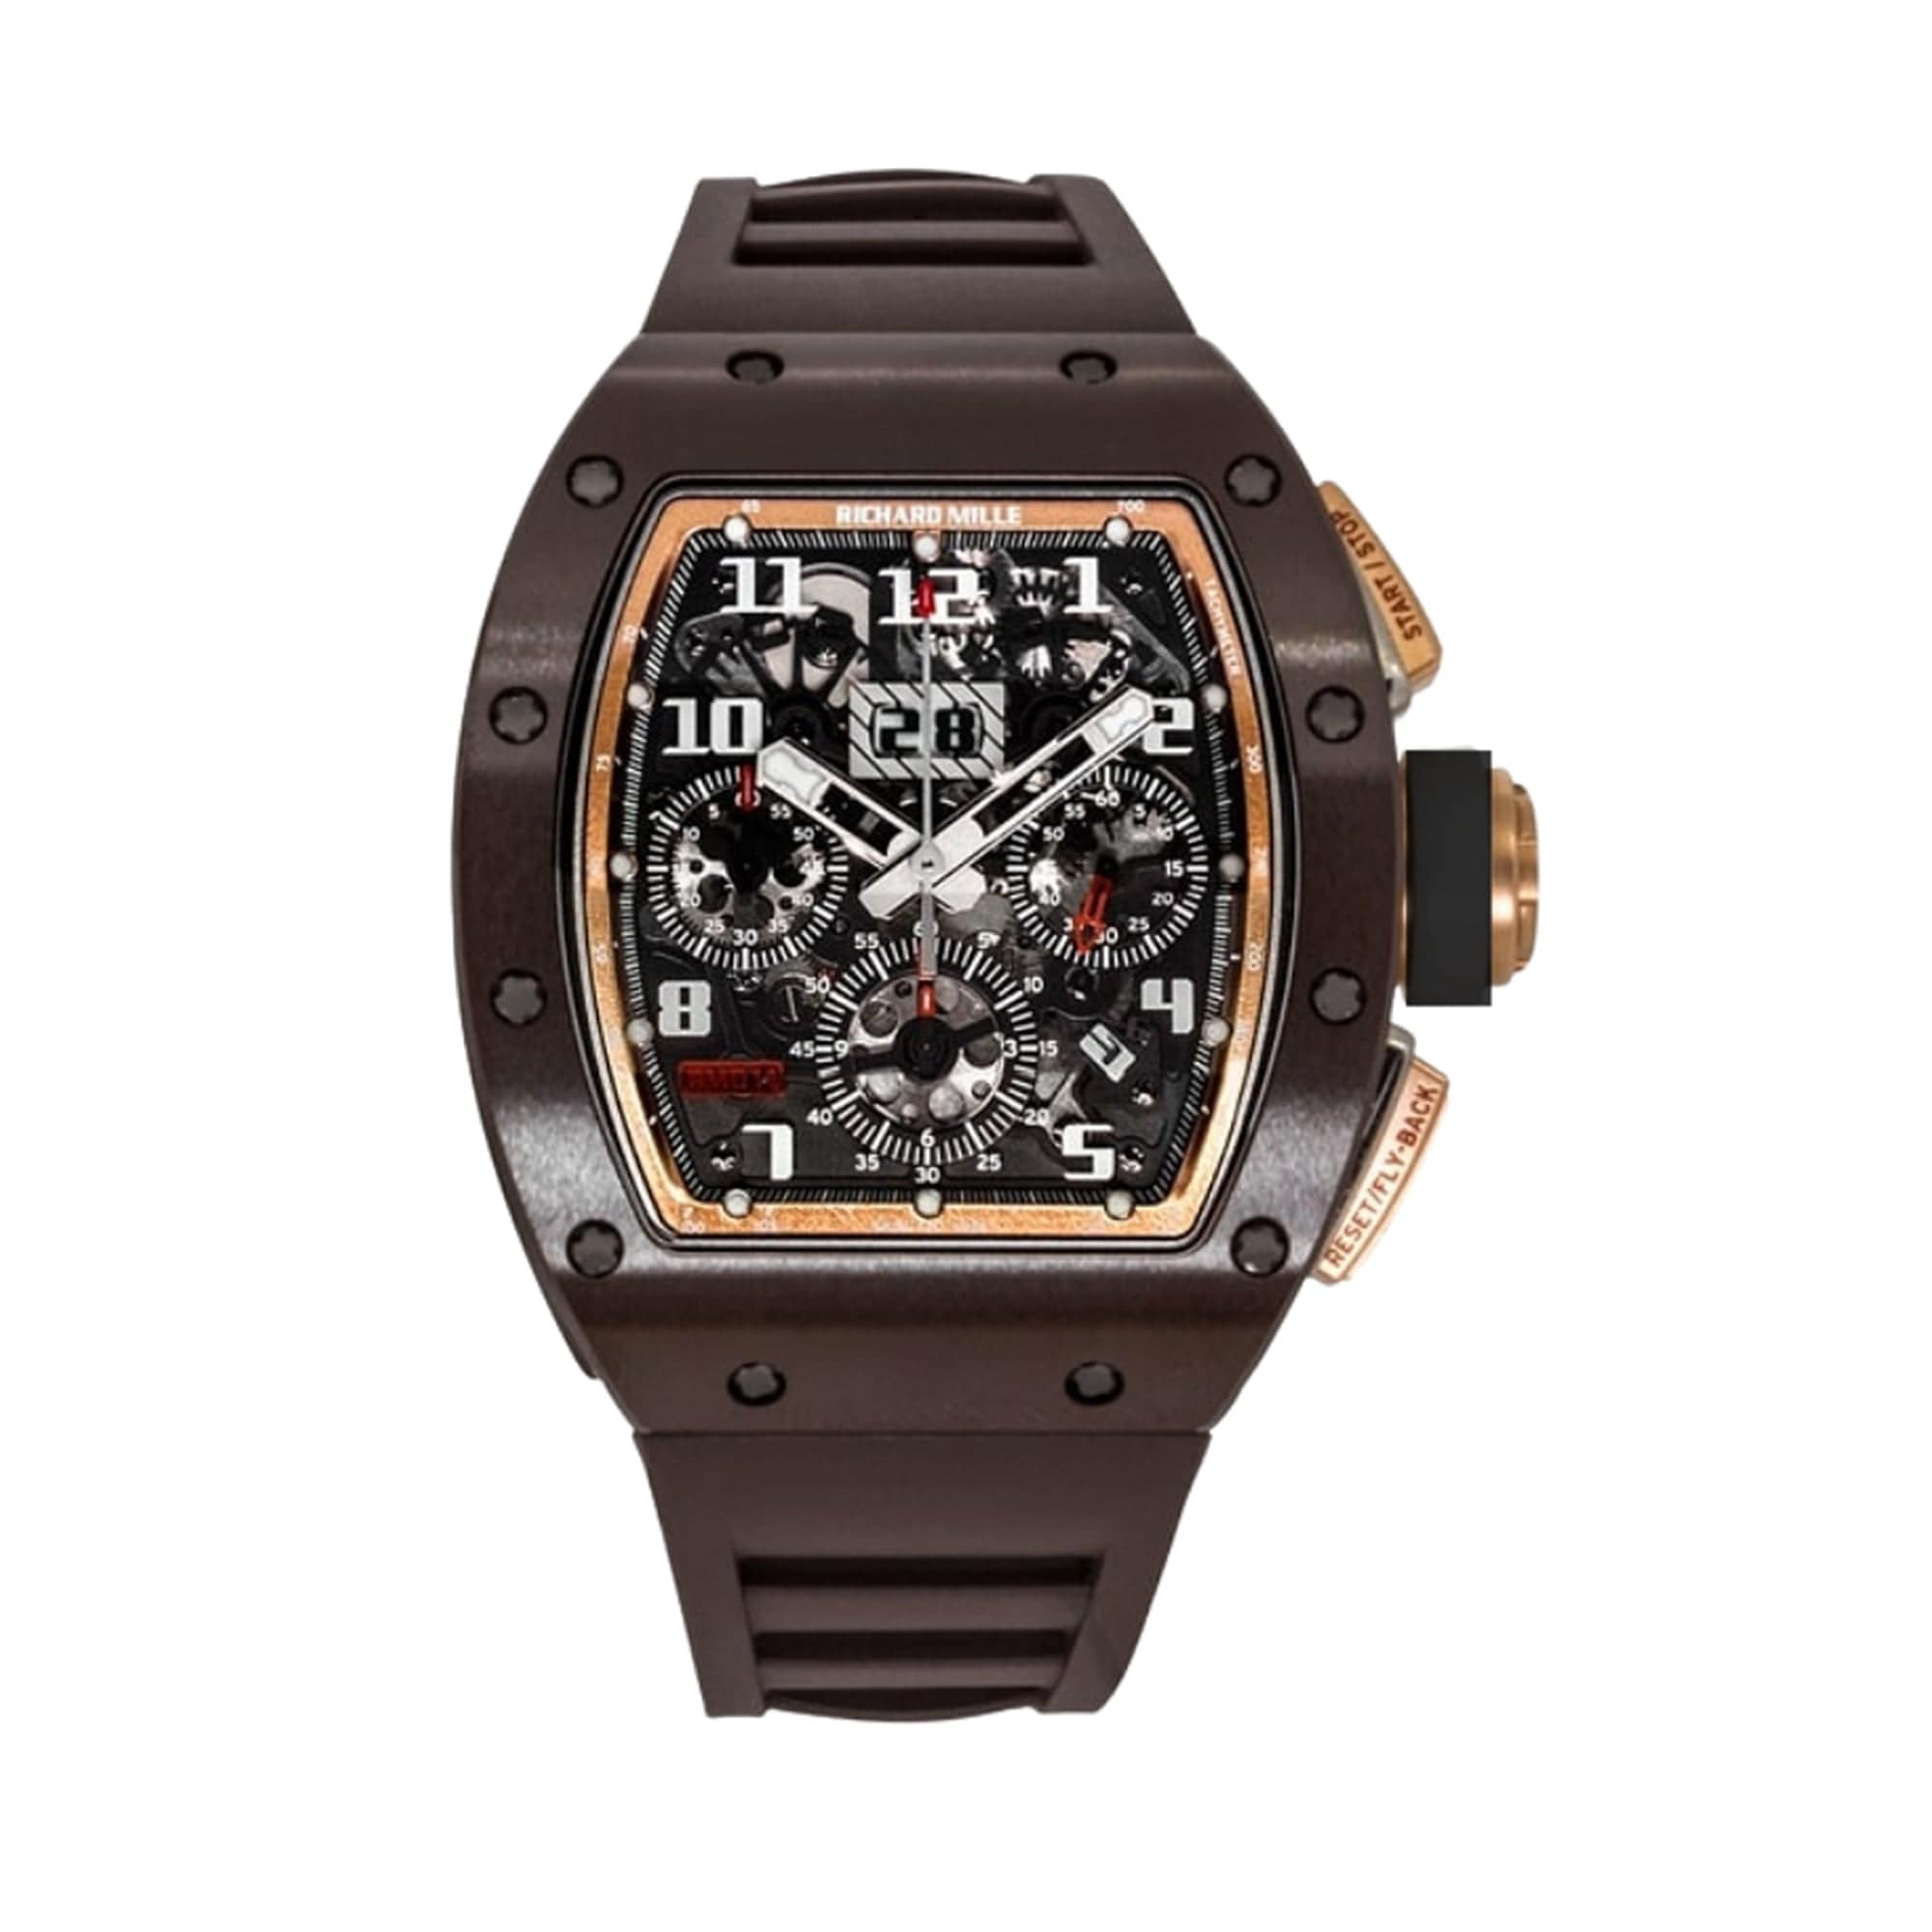 Best Price on all RICHARD MILLE Watches Guaranteed at Jaztime.com